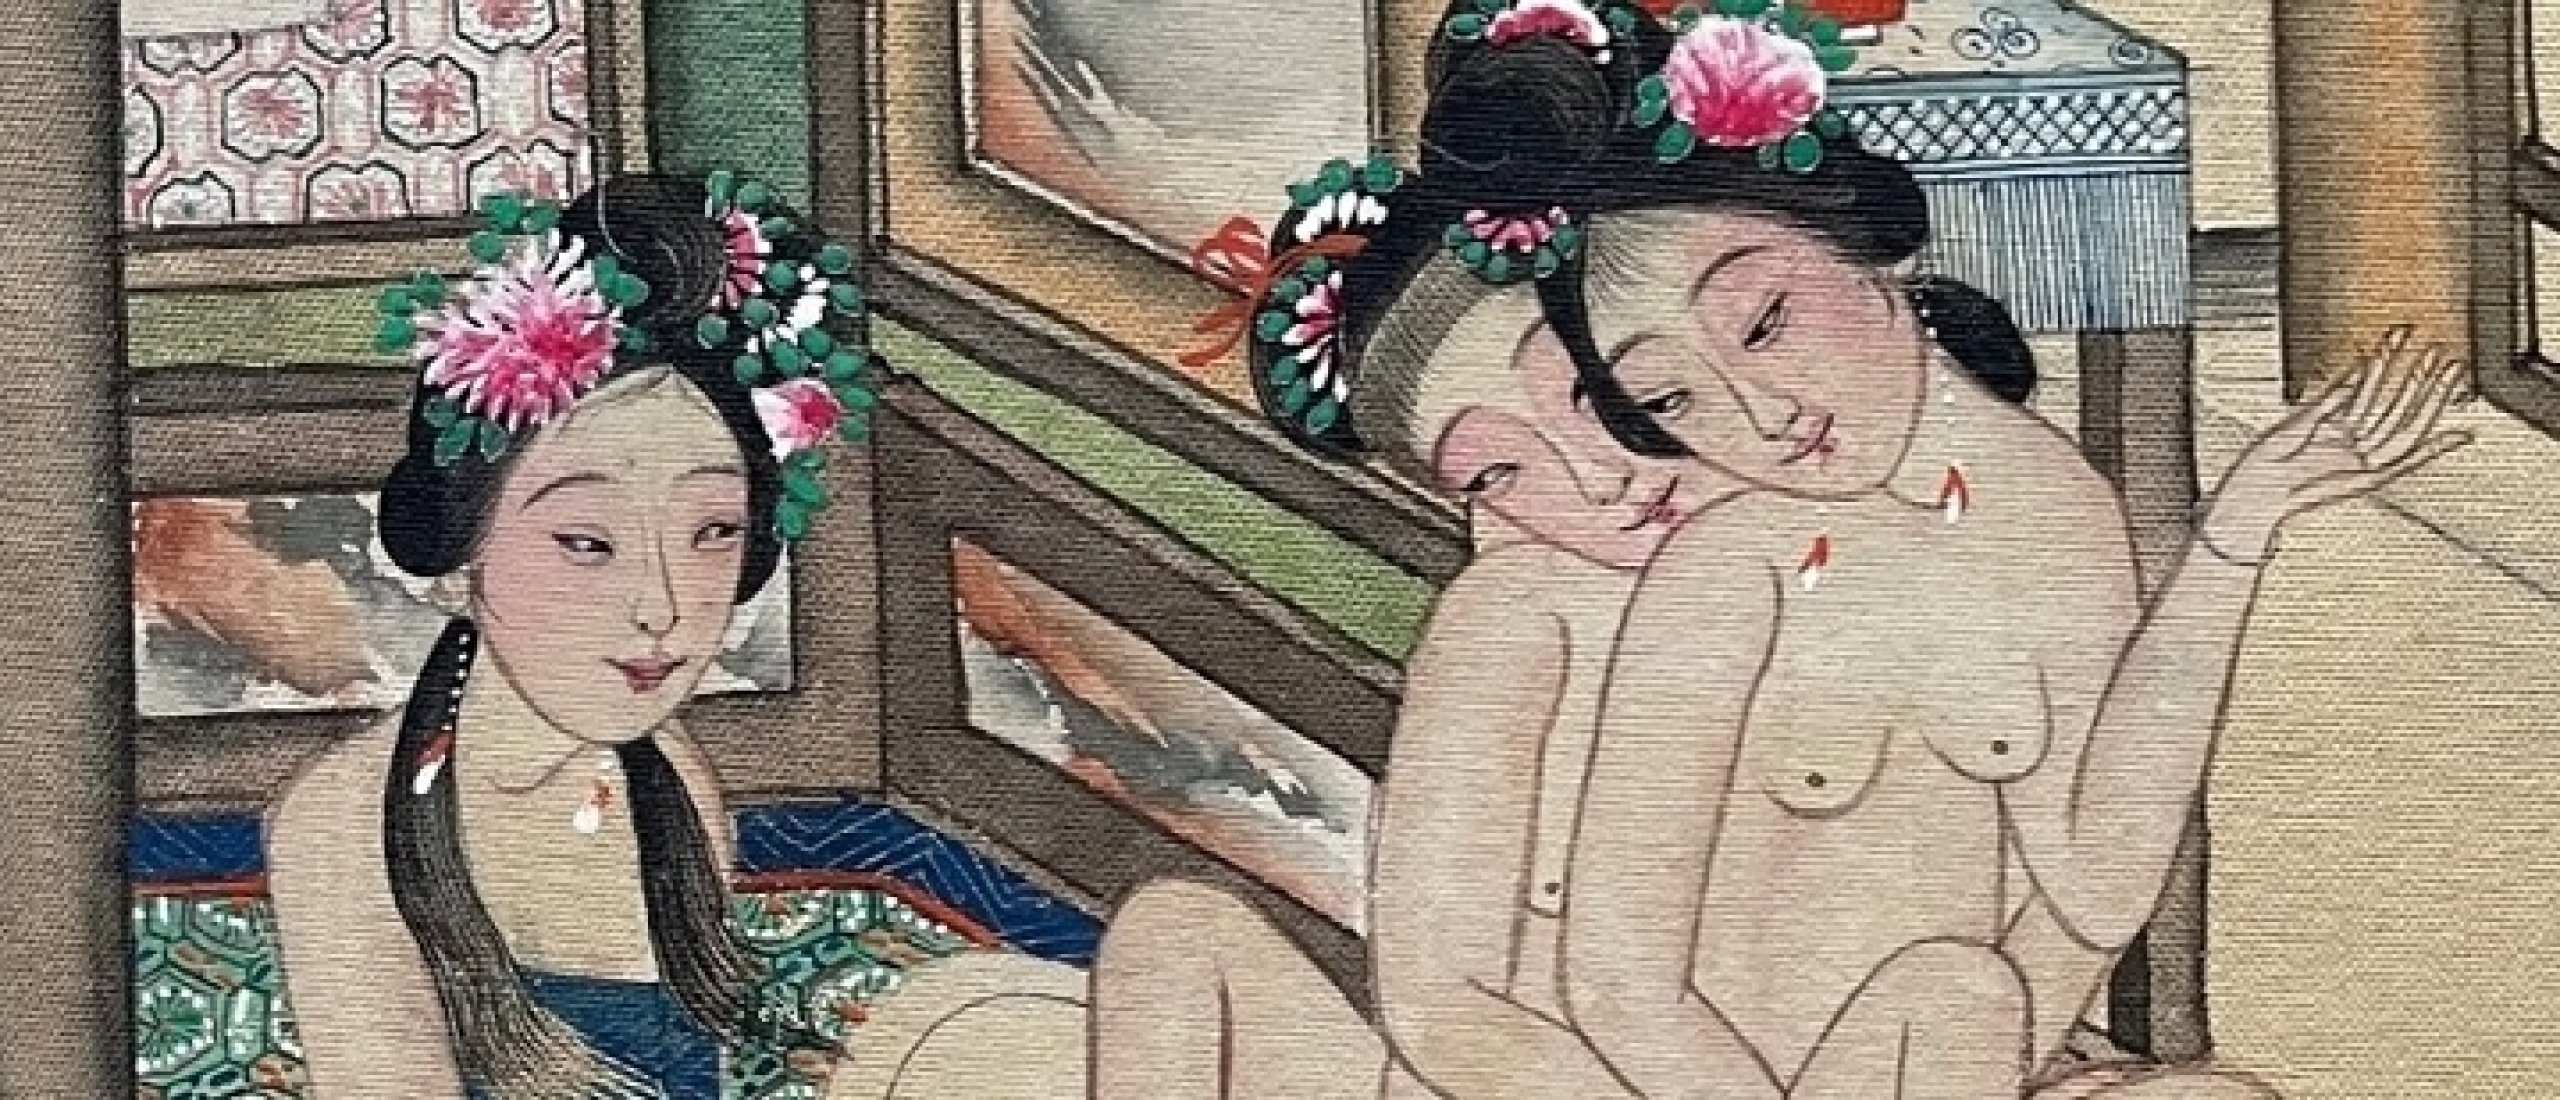 Late 19th Century Chinese Painting Depicting a Rare Lesbian Fantasy